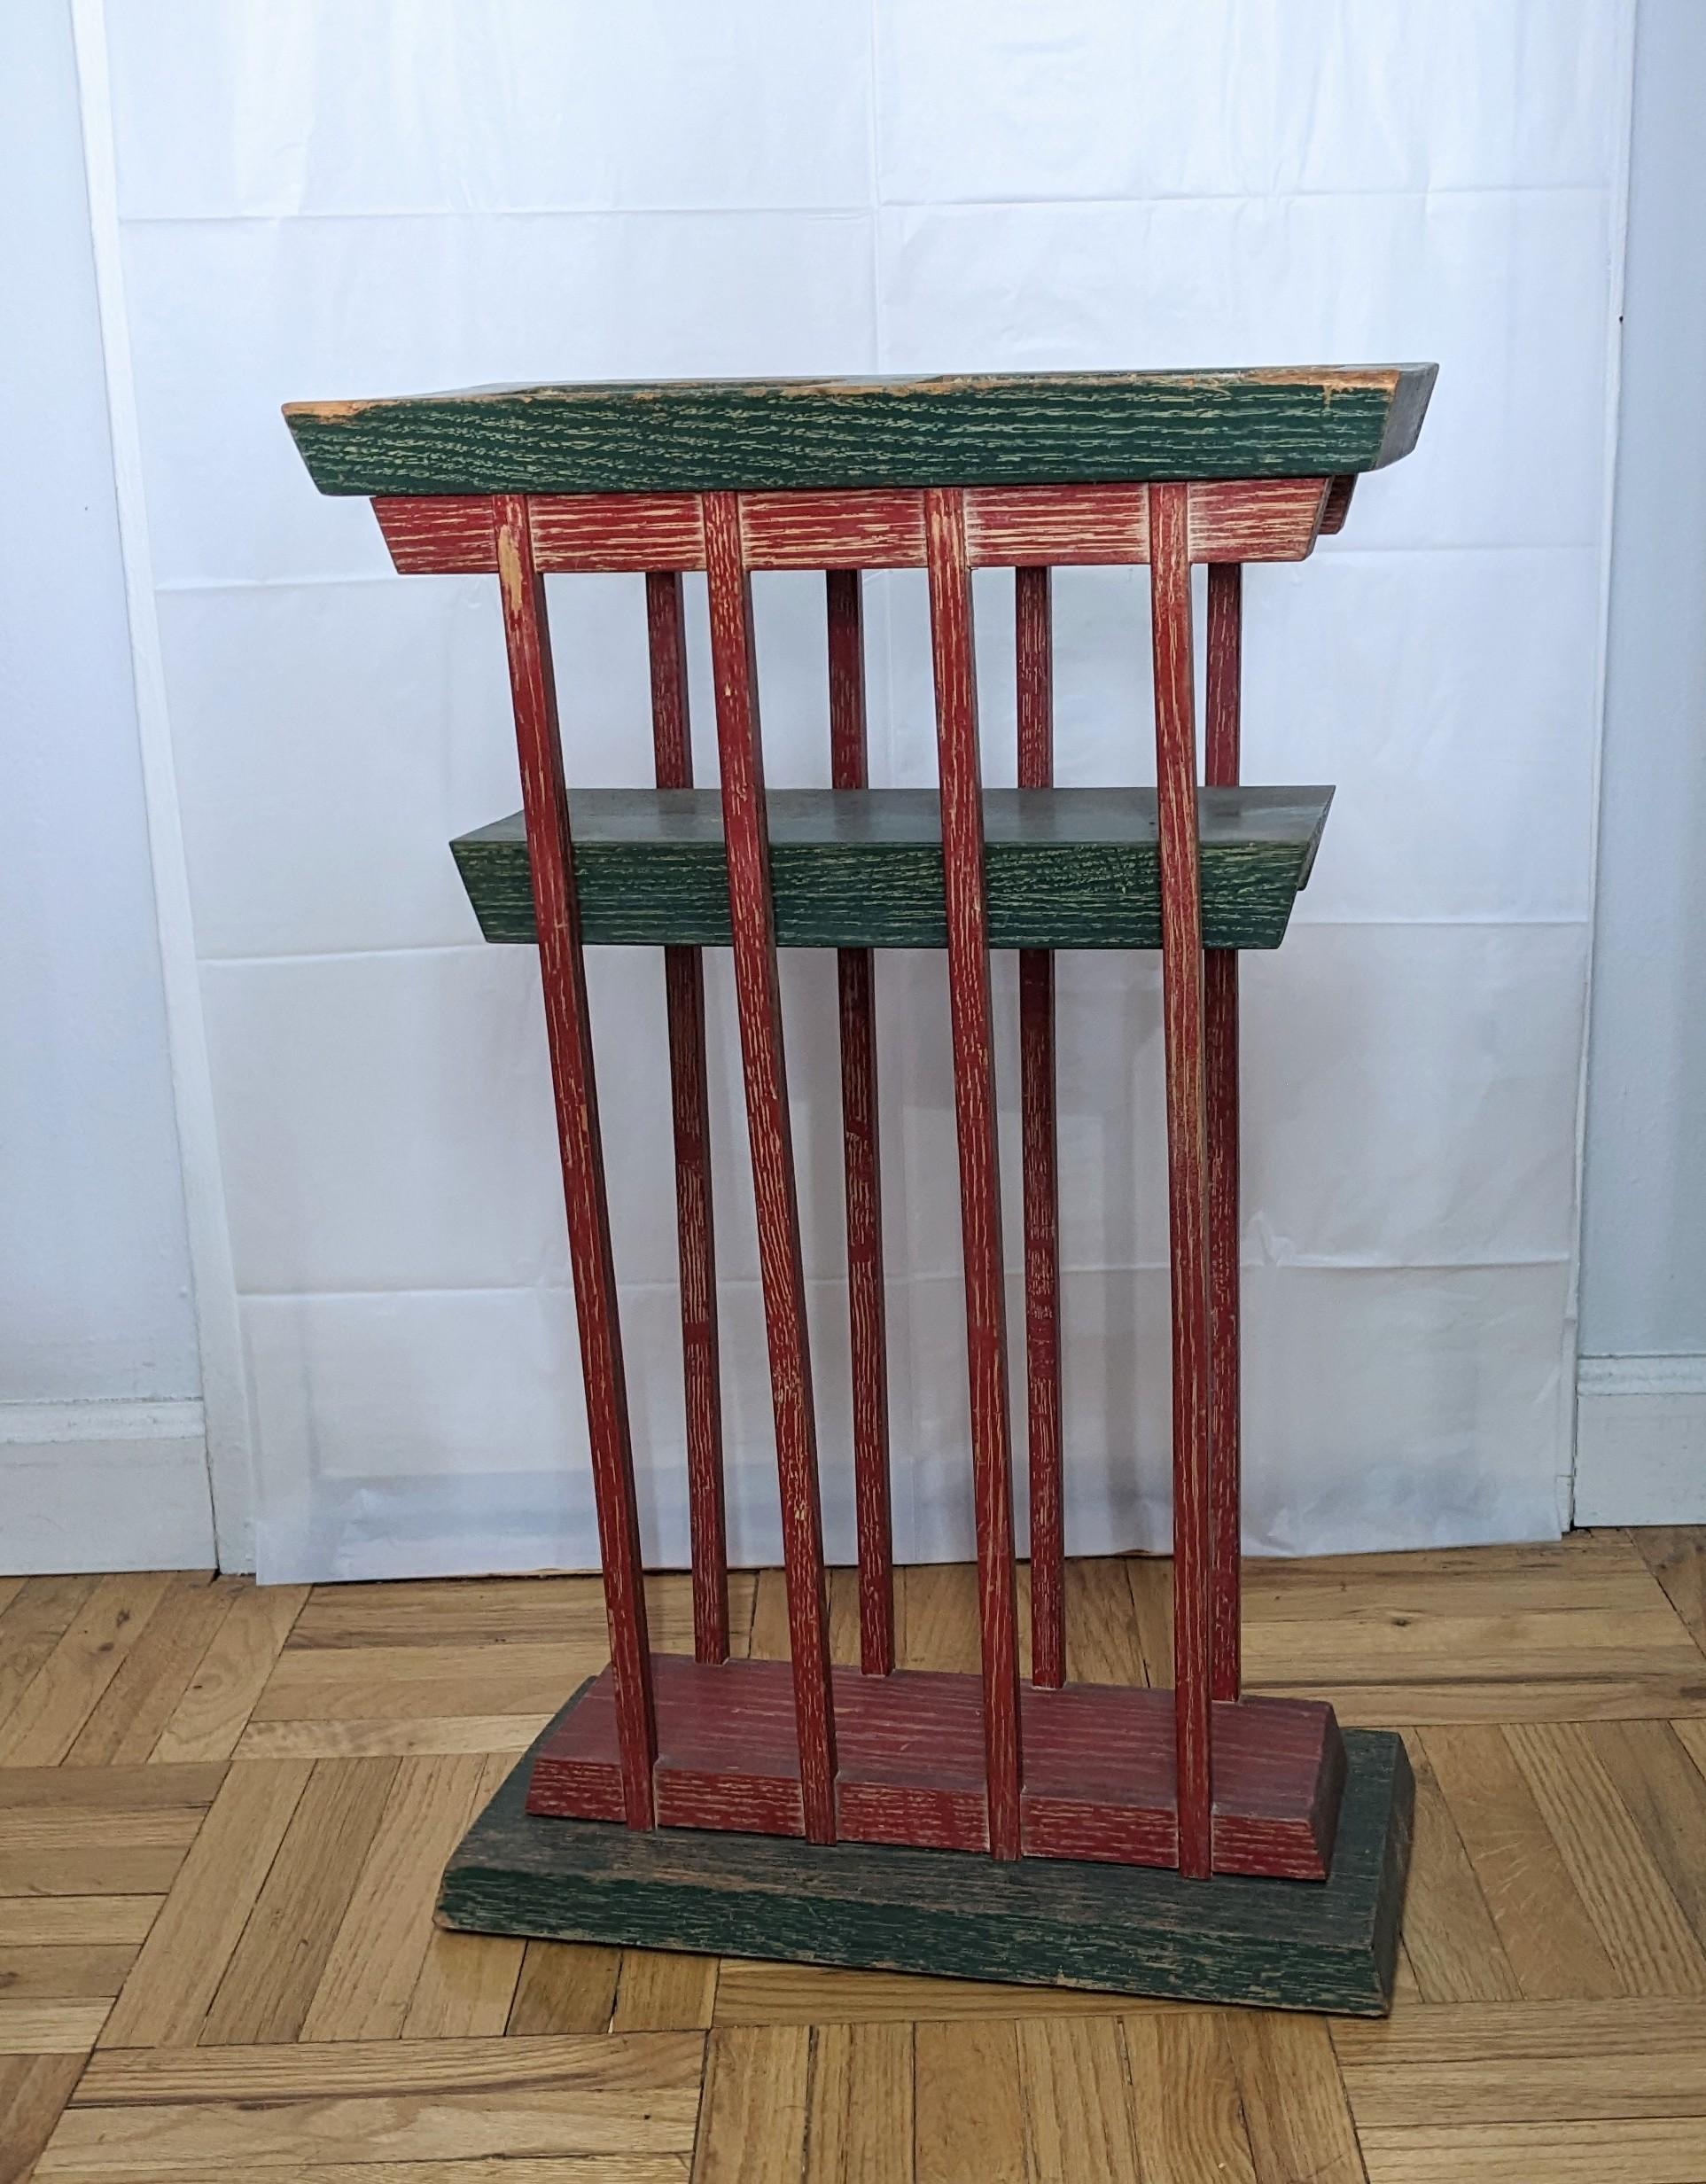 Unusual Art Deco limed smoking stand from the 1930's. Originally designed for ashtrays, can now be used for snacks or plants. Folk Art and Art Deco vibes mixed in this hand made piece. 1930's USA.